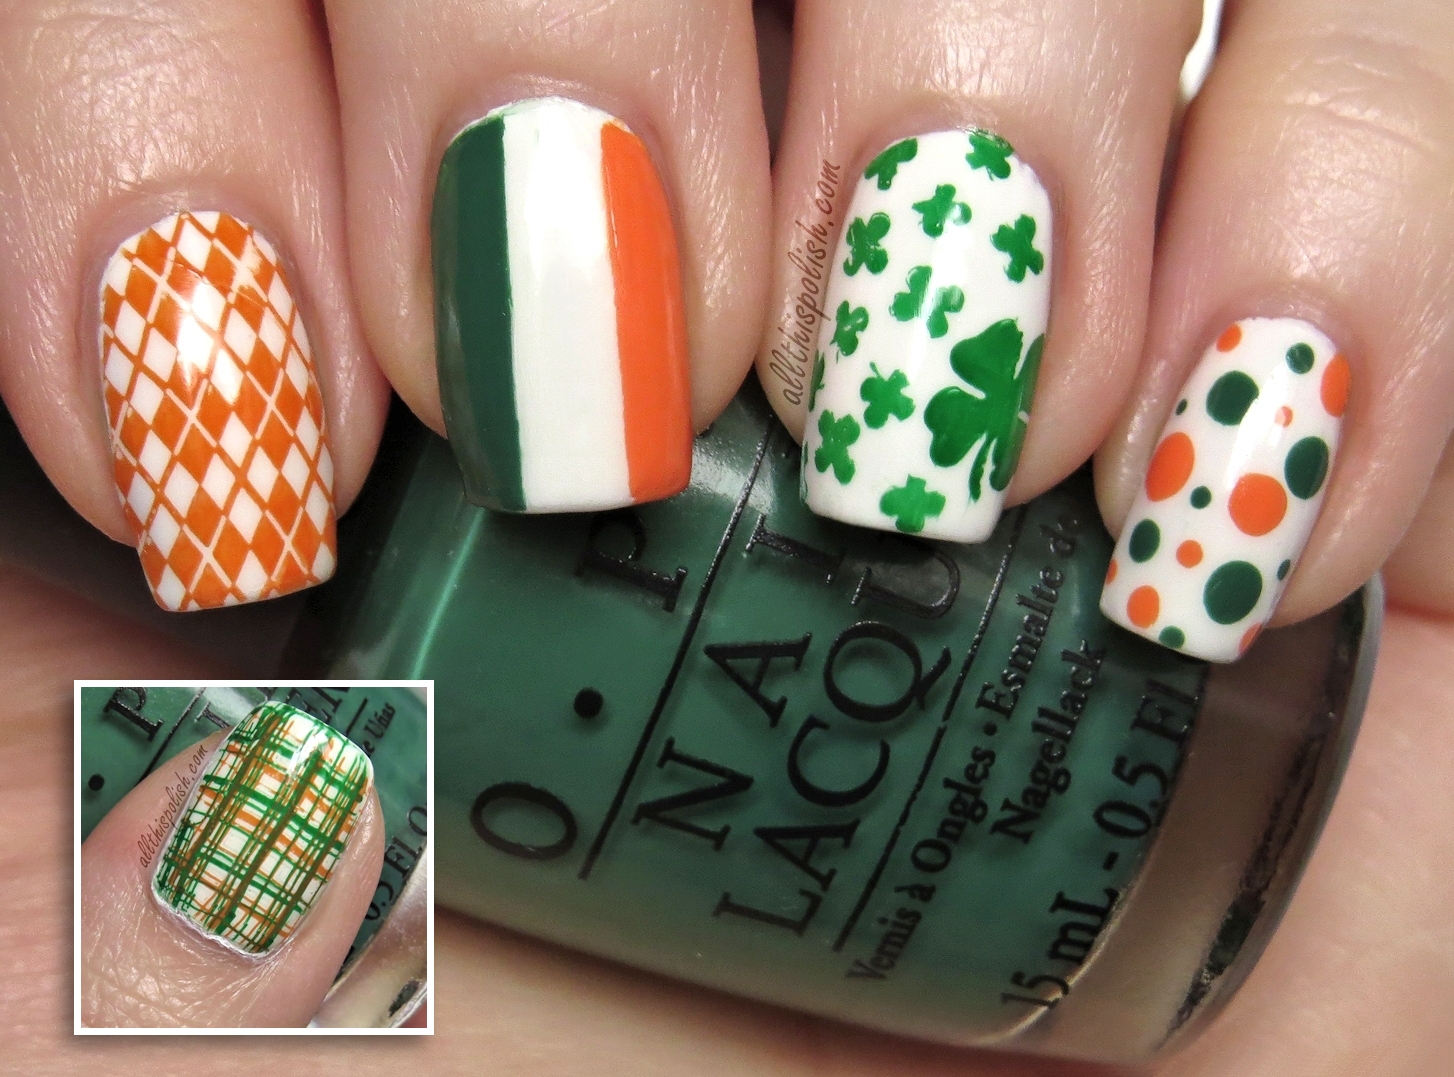 All This Polish: St. Patrick's Day Skittles